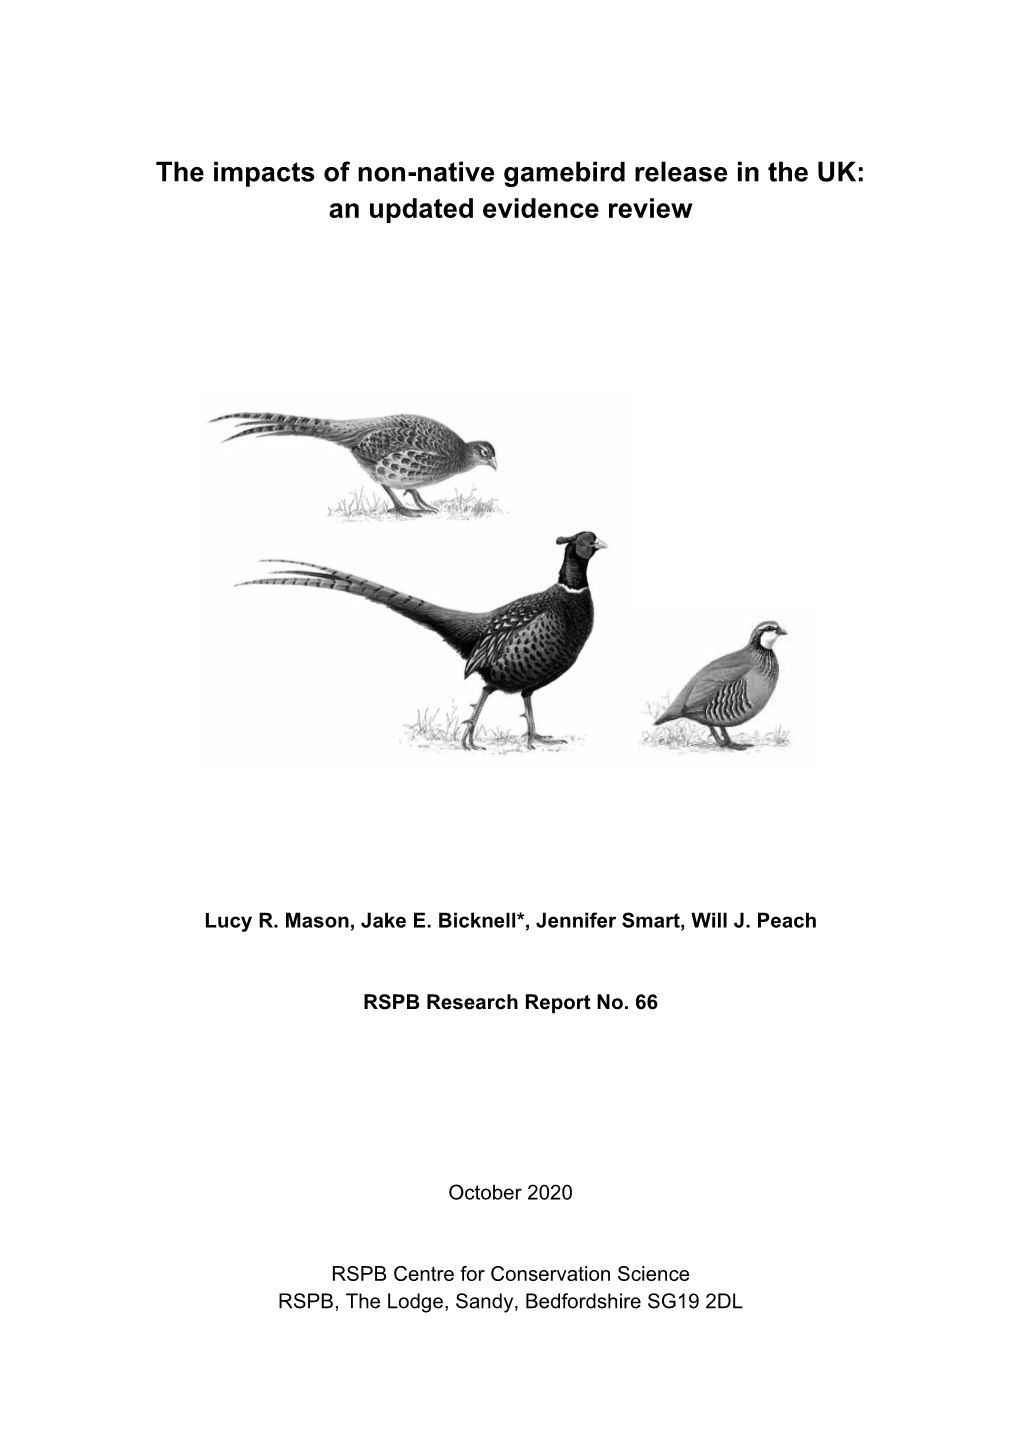 The Impacts of Non-Native Gamebird Release in the UK: an Updated Evidence Review